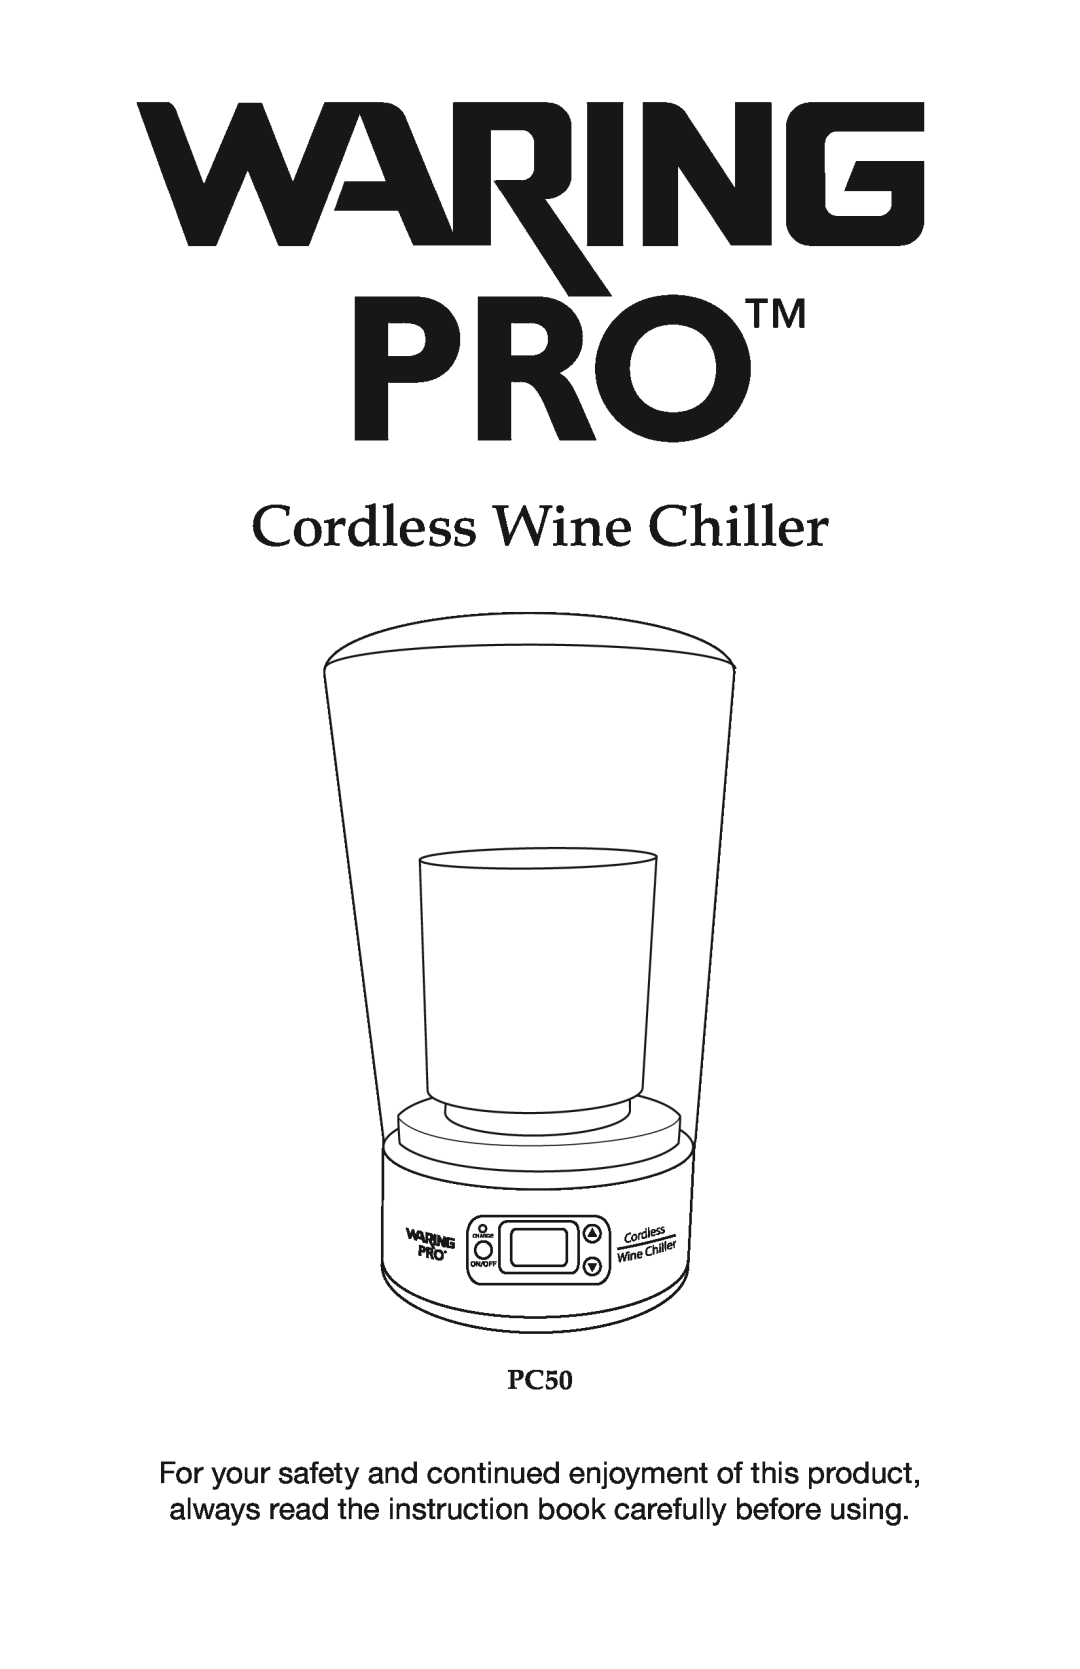 Waring PC50 manual Cordless Wine Chiller, Charge 